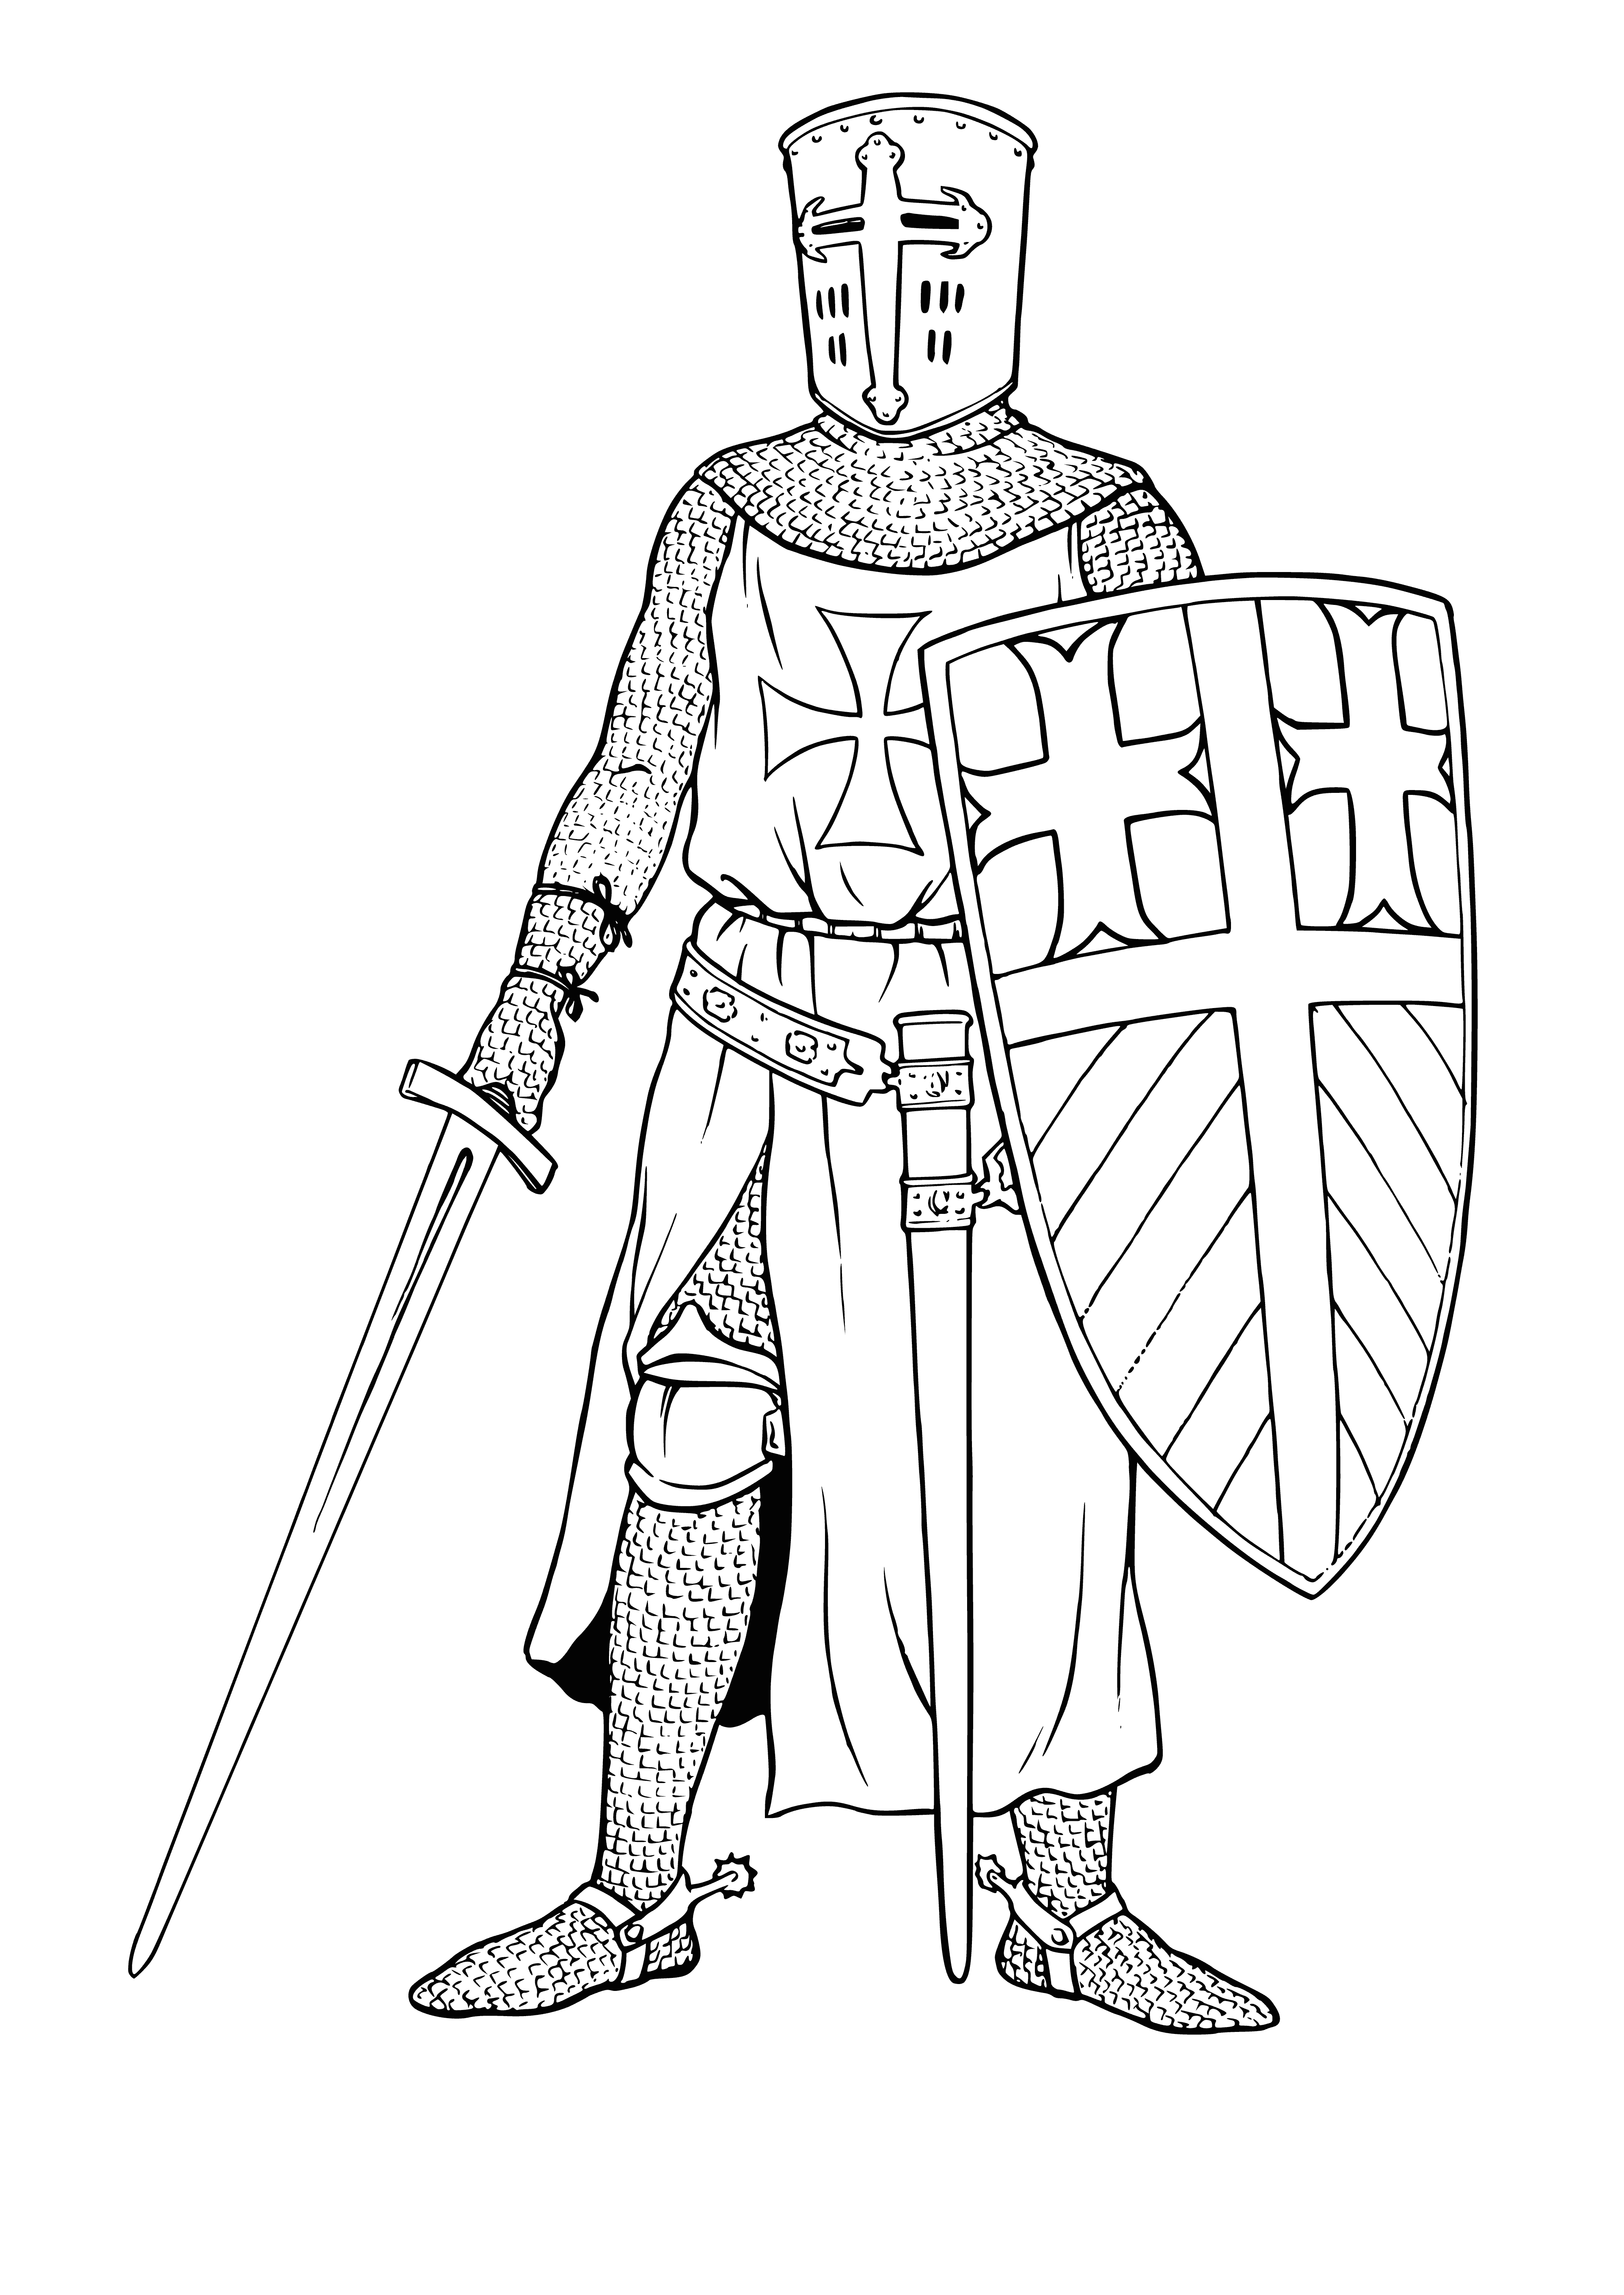 coloring page: Man in armor stands on battlefield hill, holding shield and sword. Determined to fight for his cause.